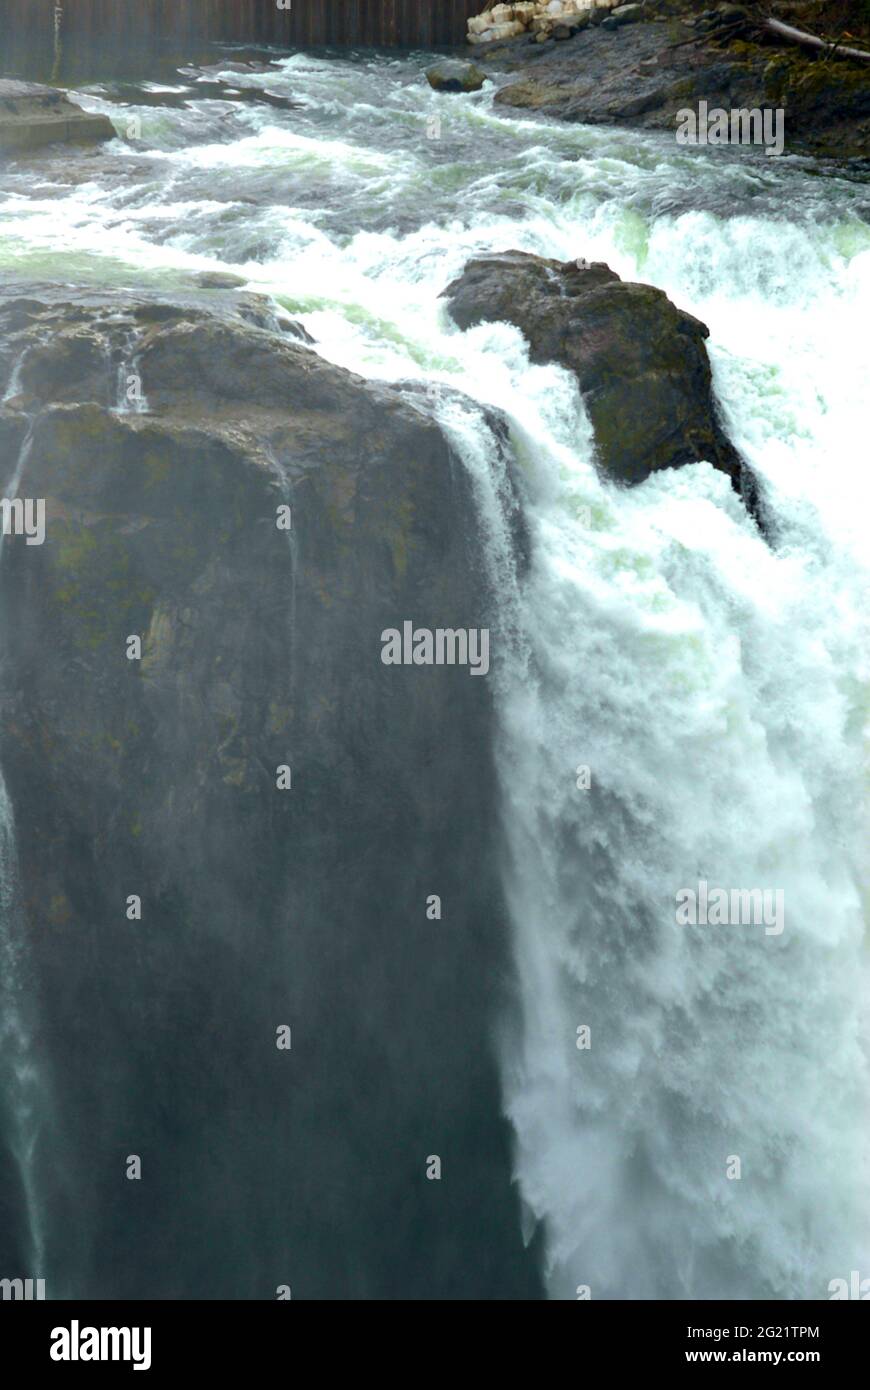 Water crashes down Snoqualmie Falls in Snoqualmie, Washington, USA, on a cold winter day. Stock Photo